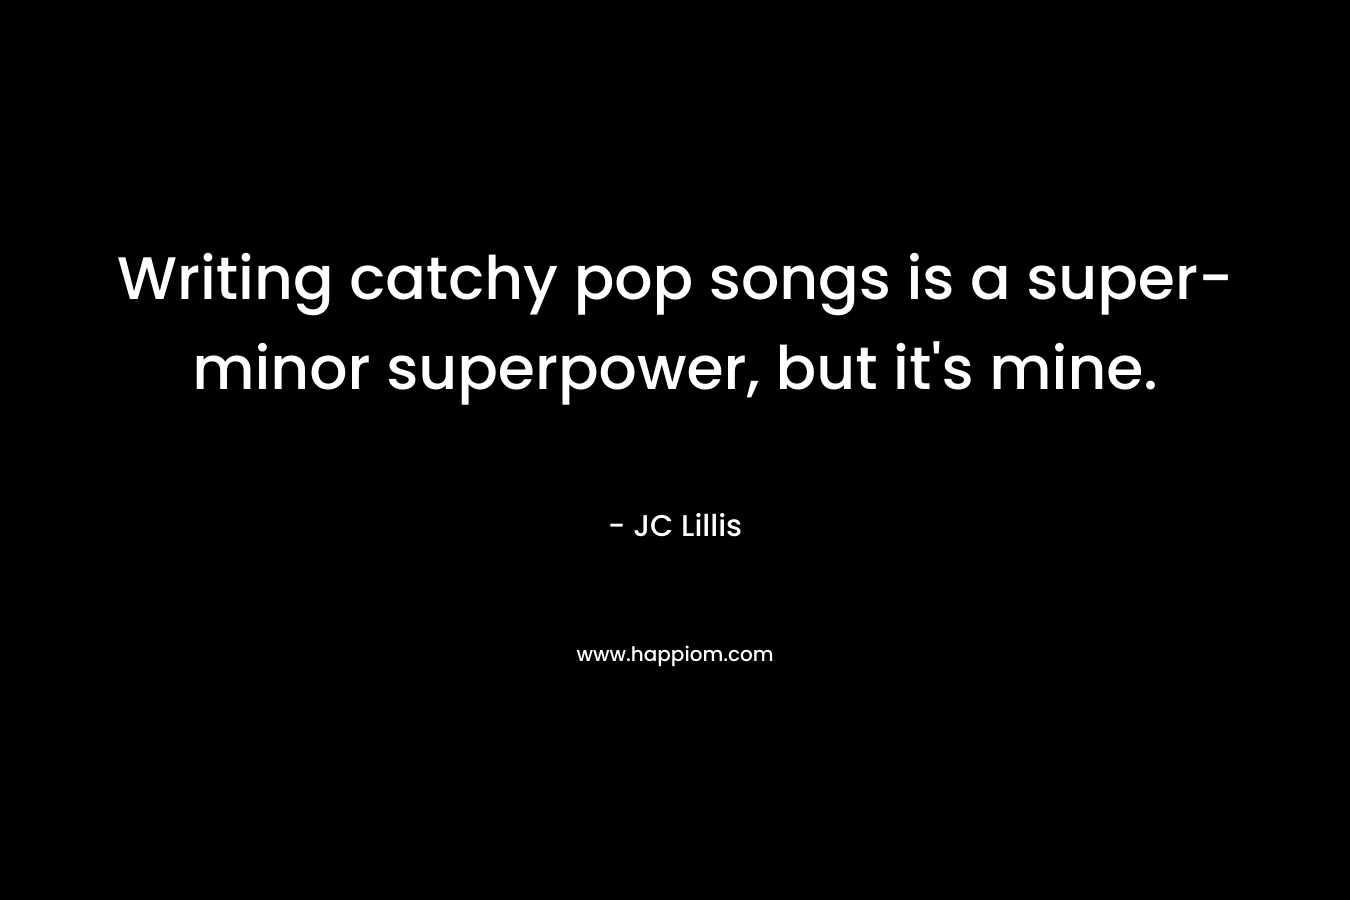 Writing catchy pop songs is a super-minor superpower, but it’s mine. – JC Lillis